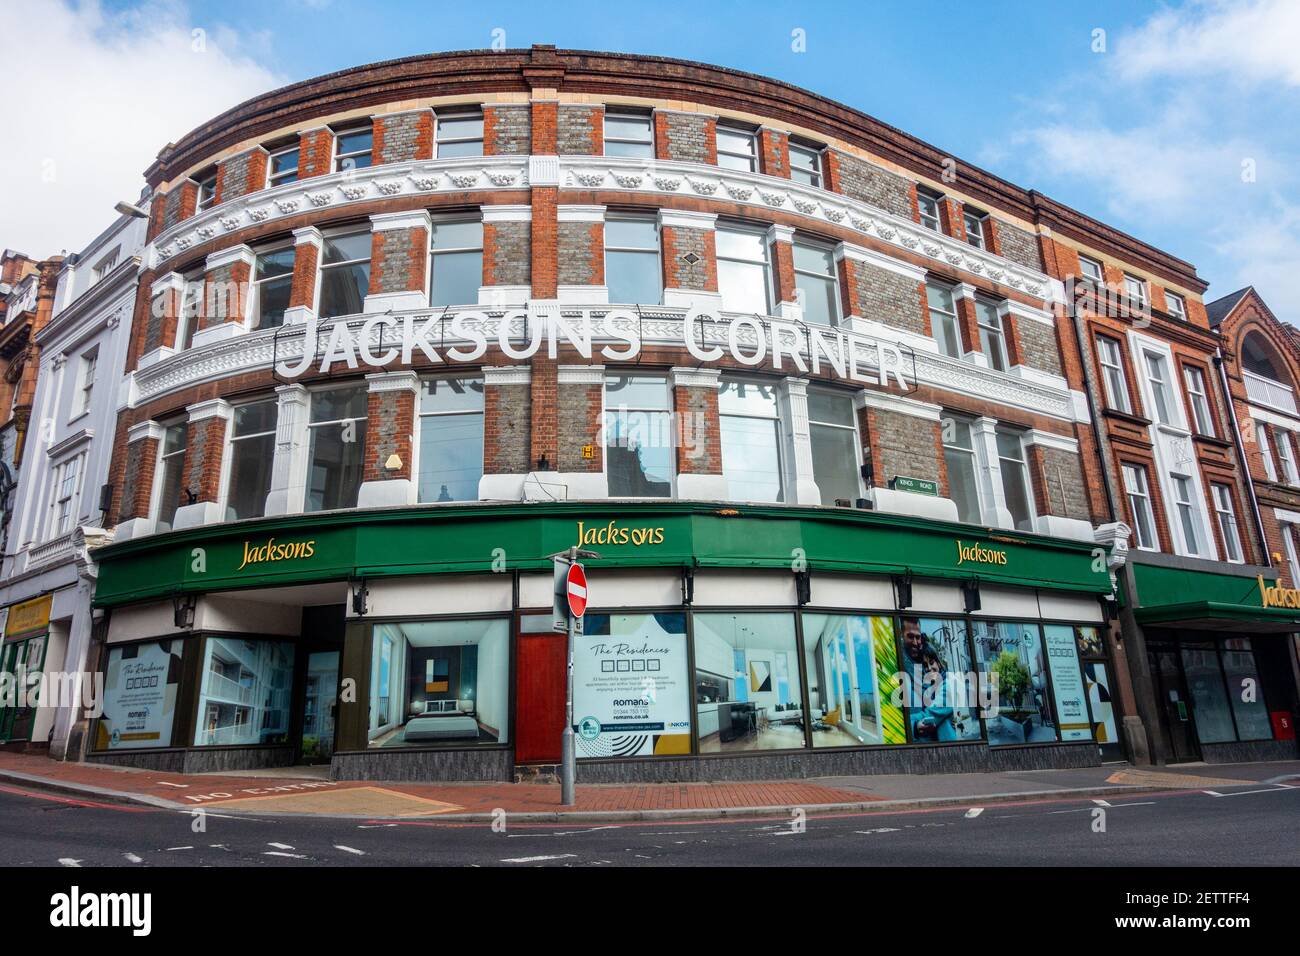 Jackson's Corner is and iconic local landmark in Reading (UK) town centre. Once the home of Jackson's department store, it now stands empty. Stock Photo